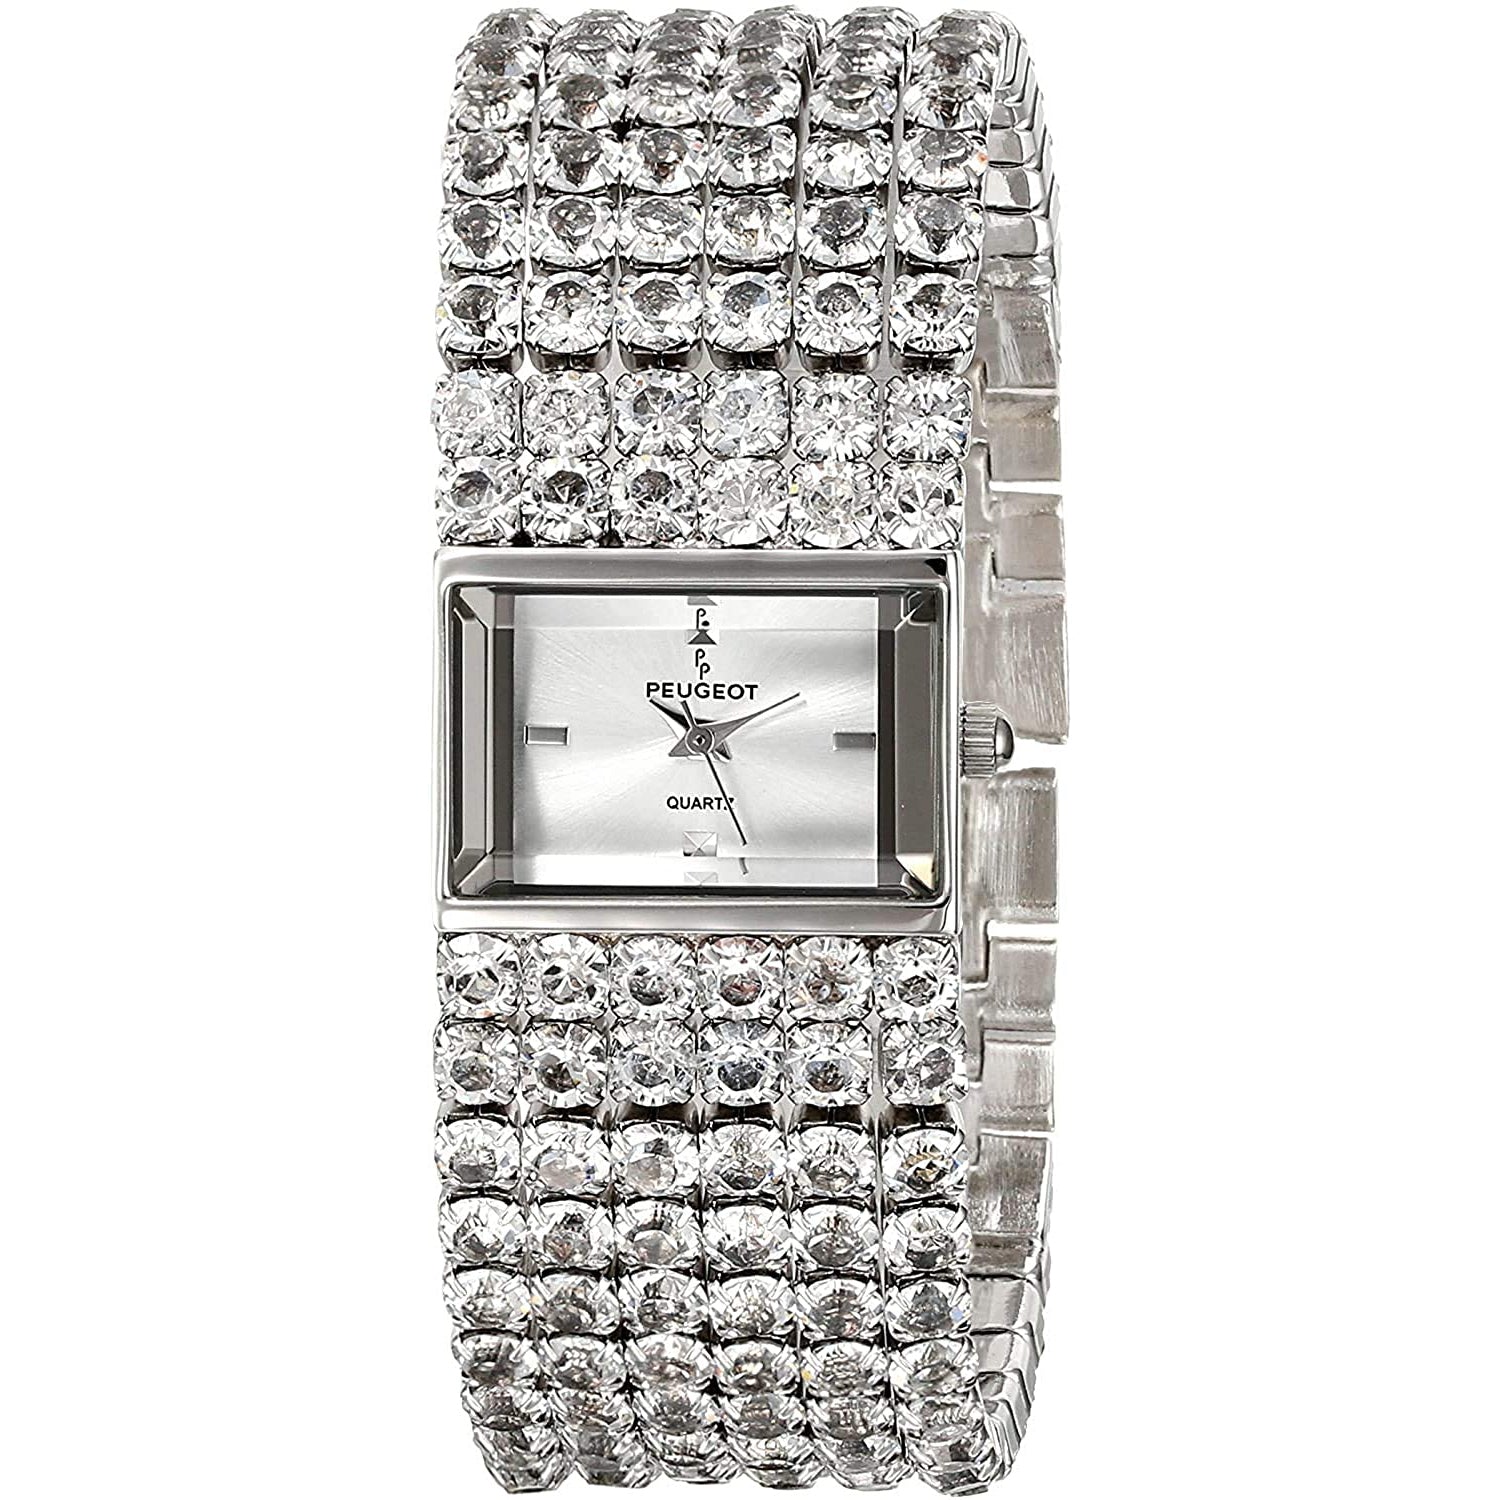 Elgin Adult Male Analog Watch and Bracelet Set in Gold with Crystals  (FG18005GST) - Walmart.com